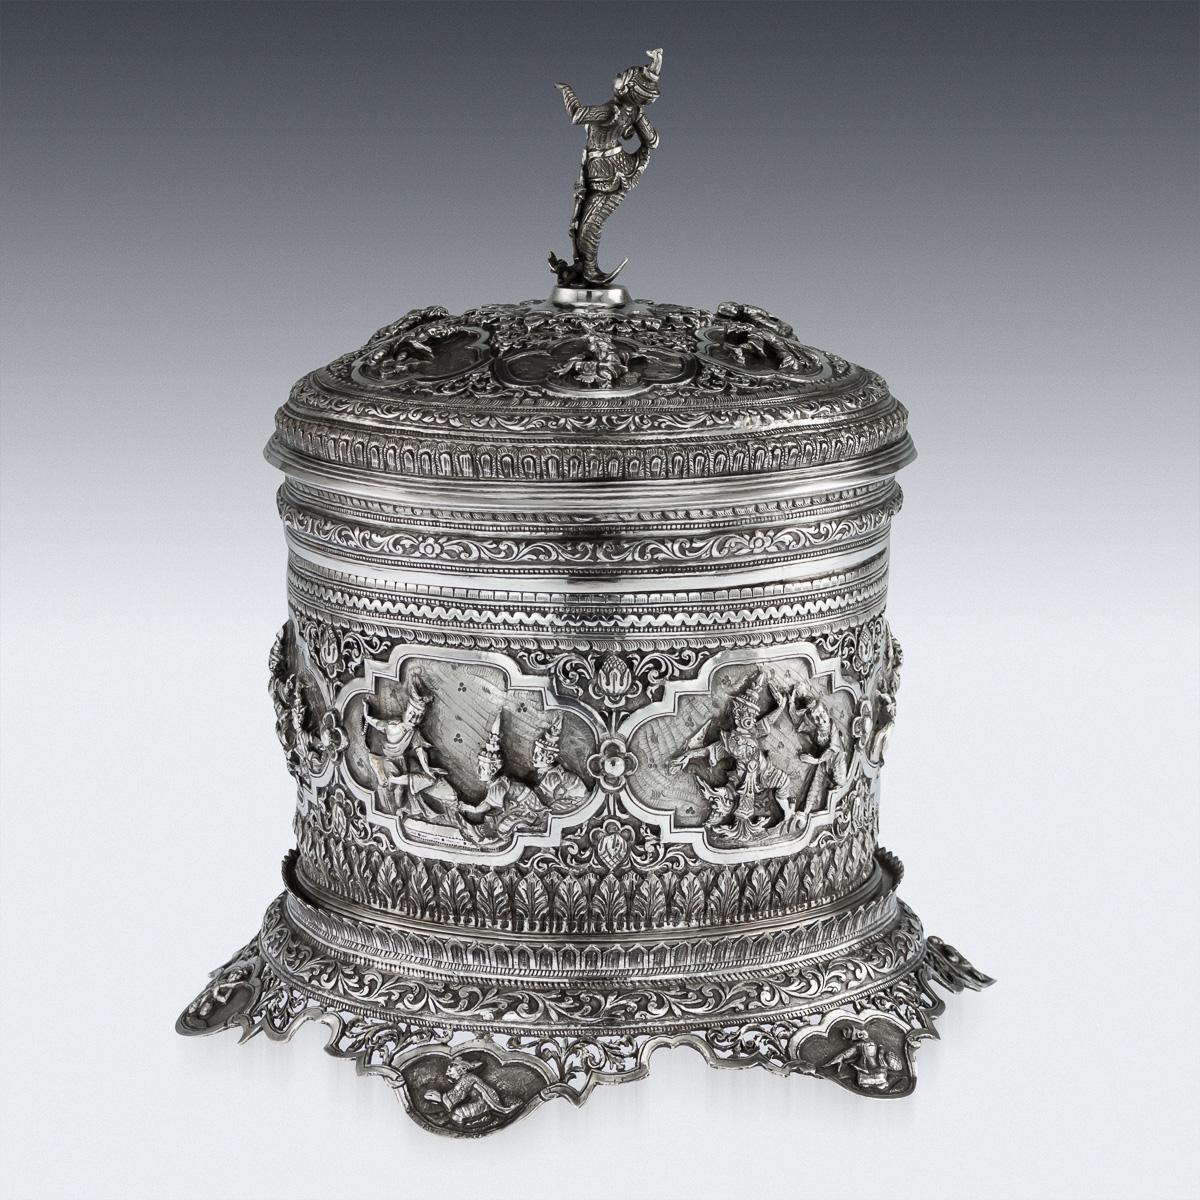 Antique late 19th century Burmese (Myanmar) solid silver betel box on stand, of traditional shape, highly-decorative, each part is chased in very high-relief with various scenes from Burmese folklore, surrounded by scrolling foliage, resting on a